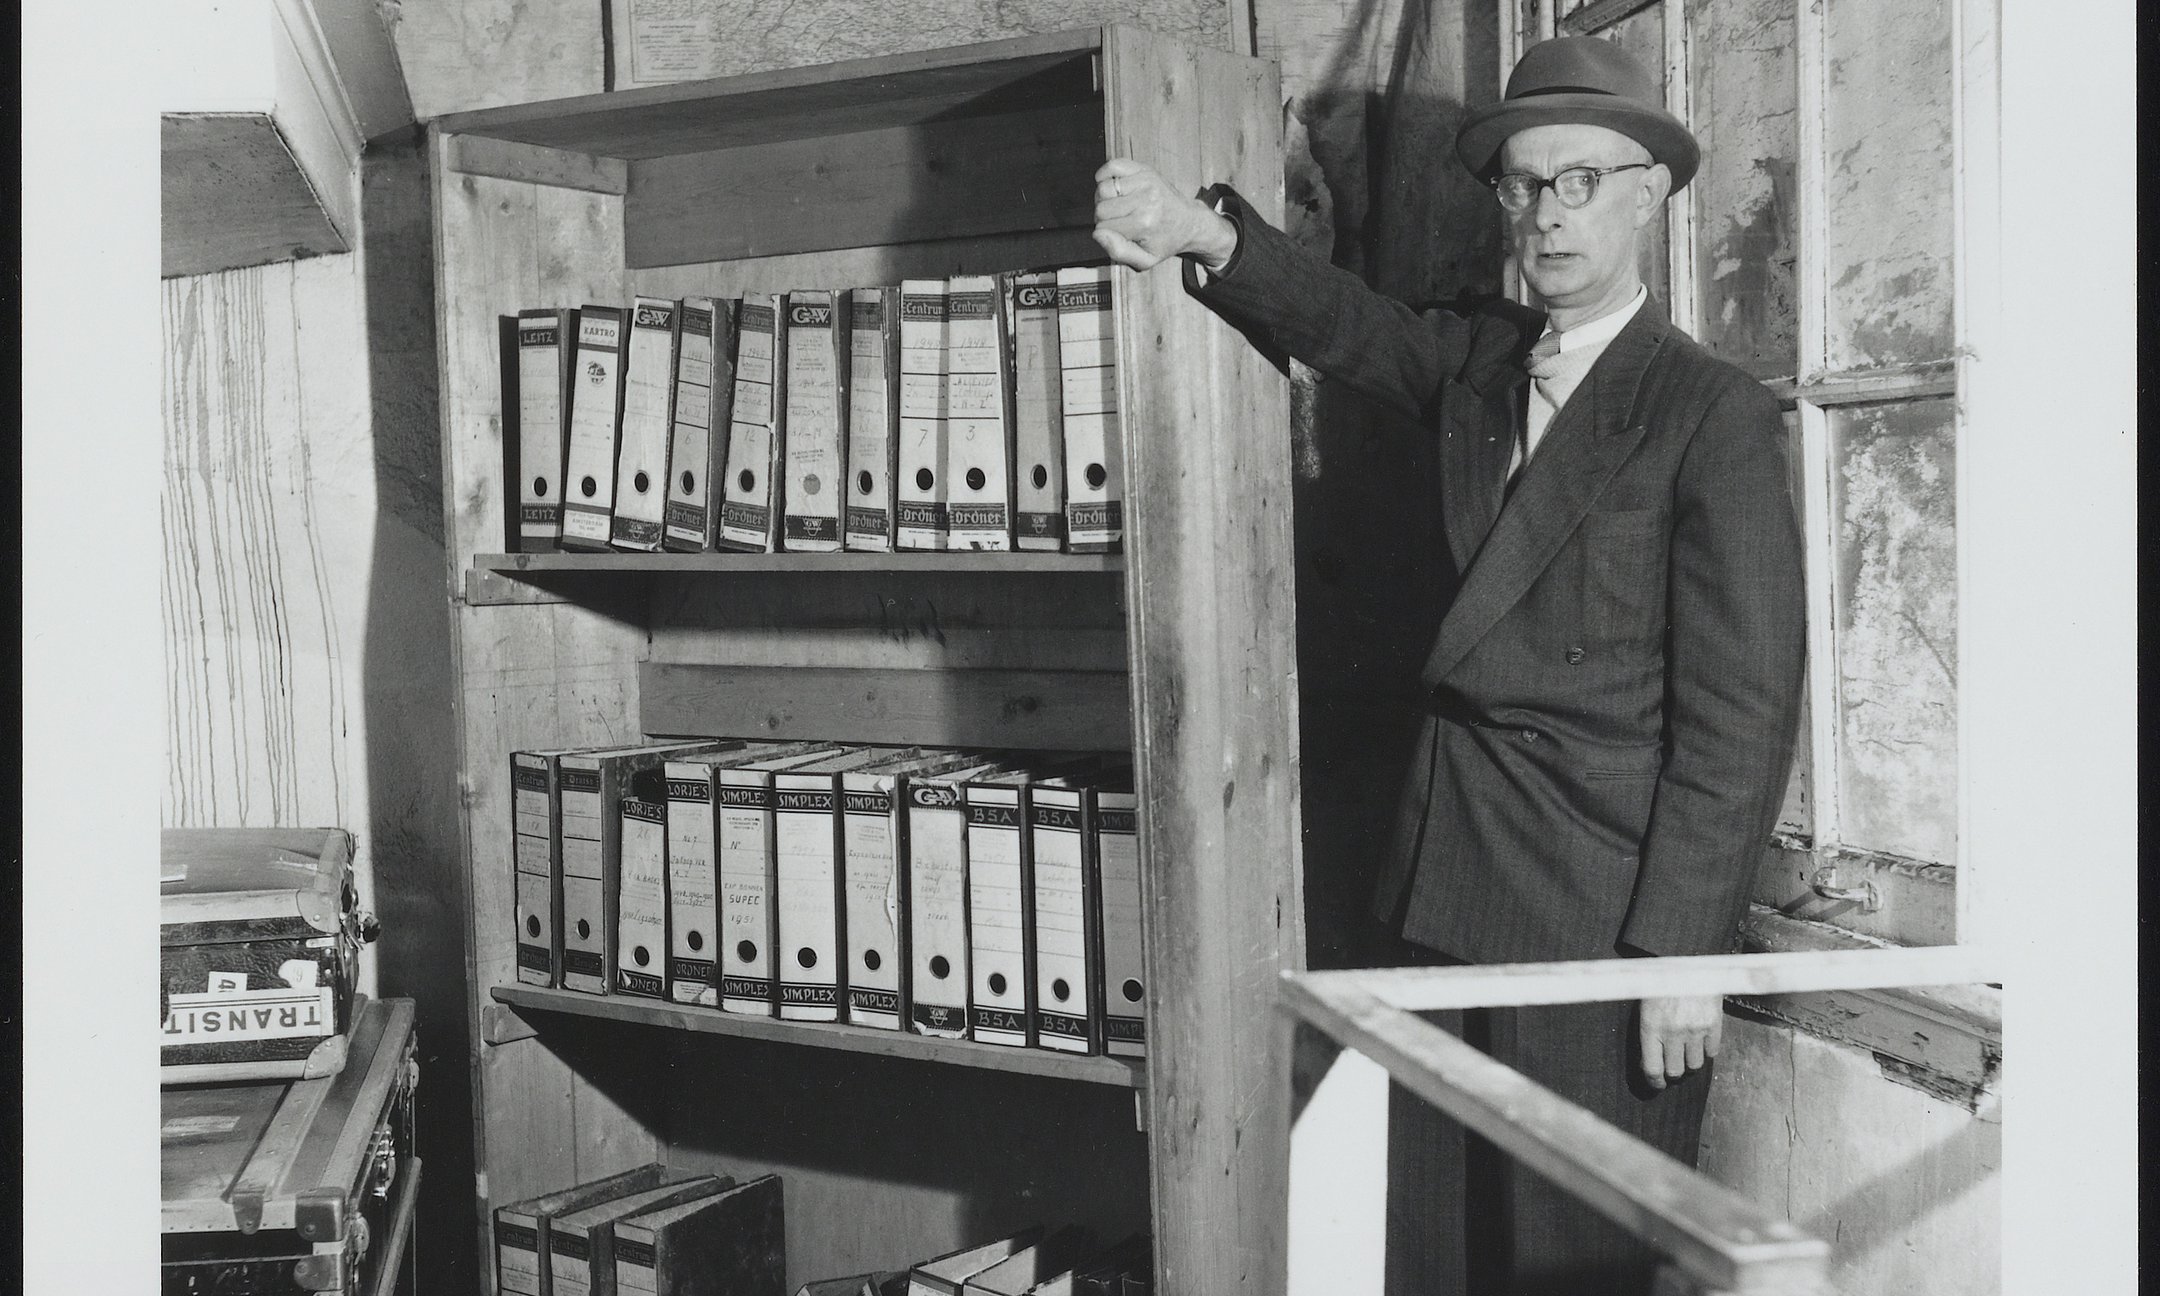 Johannes Kleiman demonstrates the workings of the bookcase, 1954.